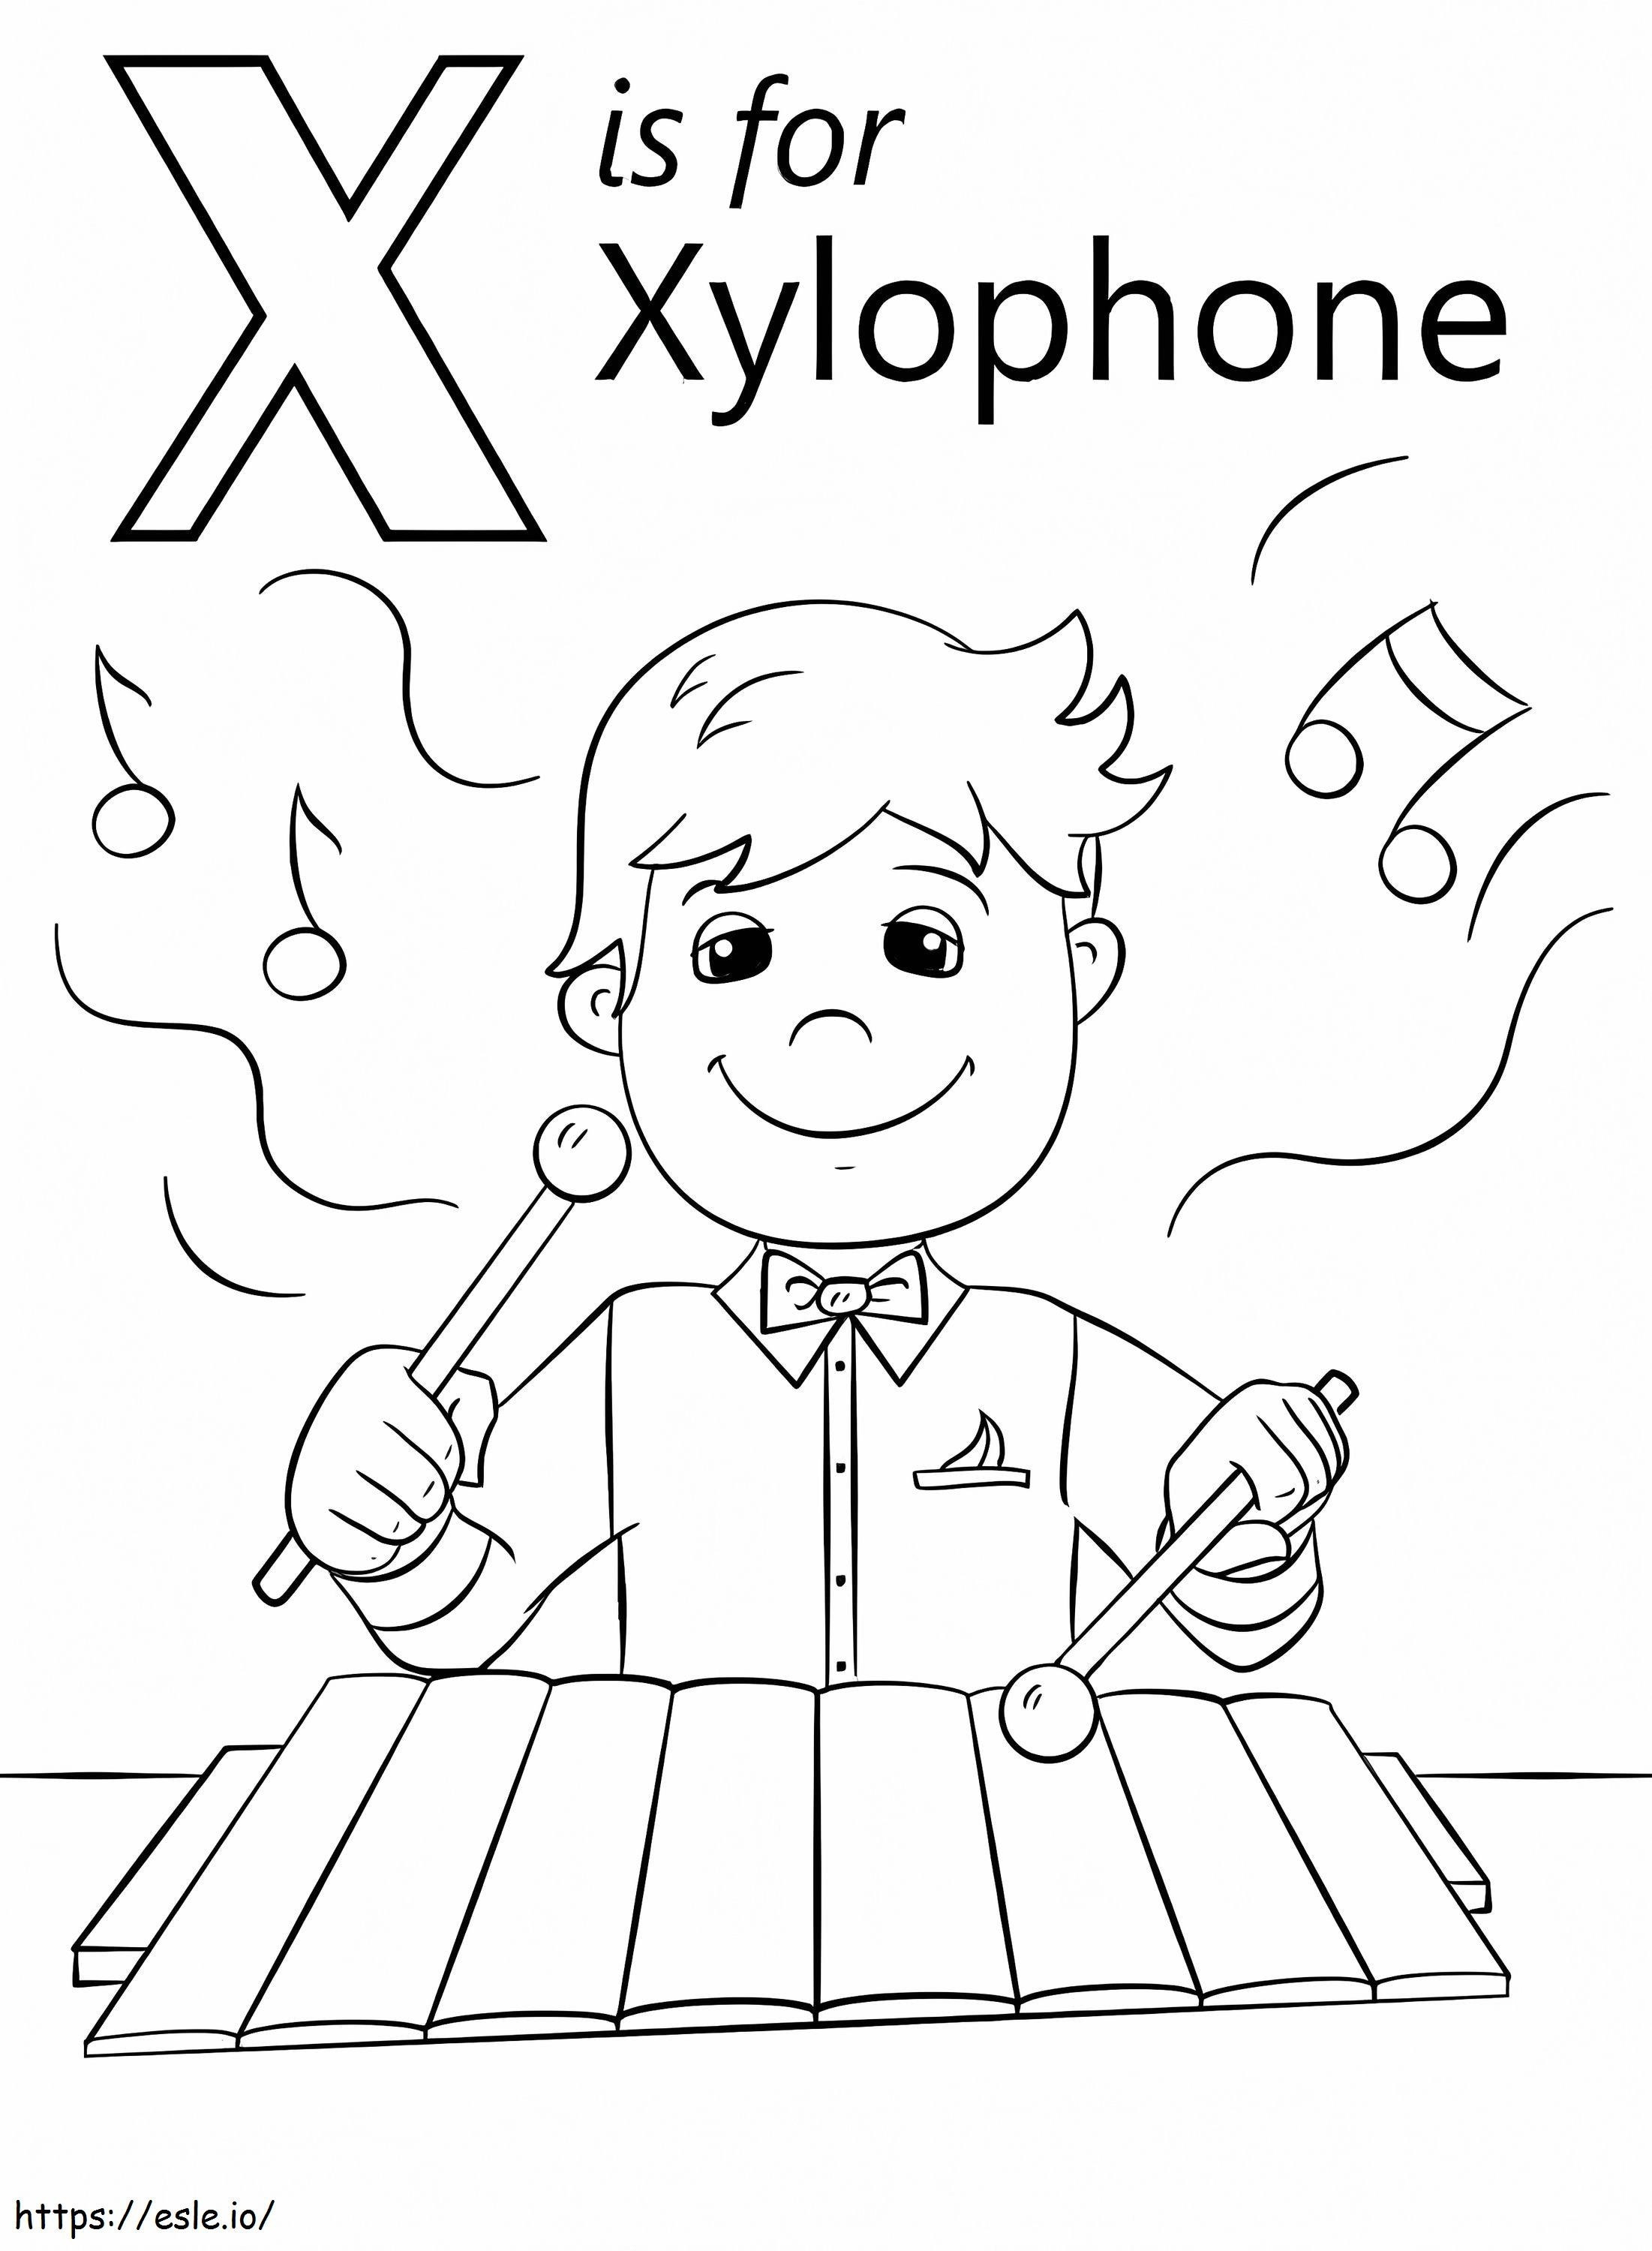 Xylophone With Child Letter X coloring page